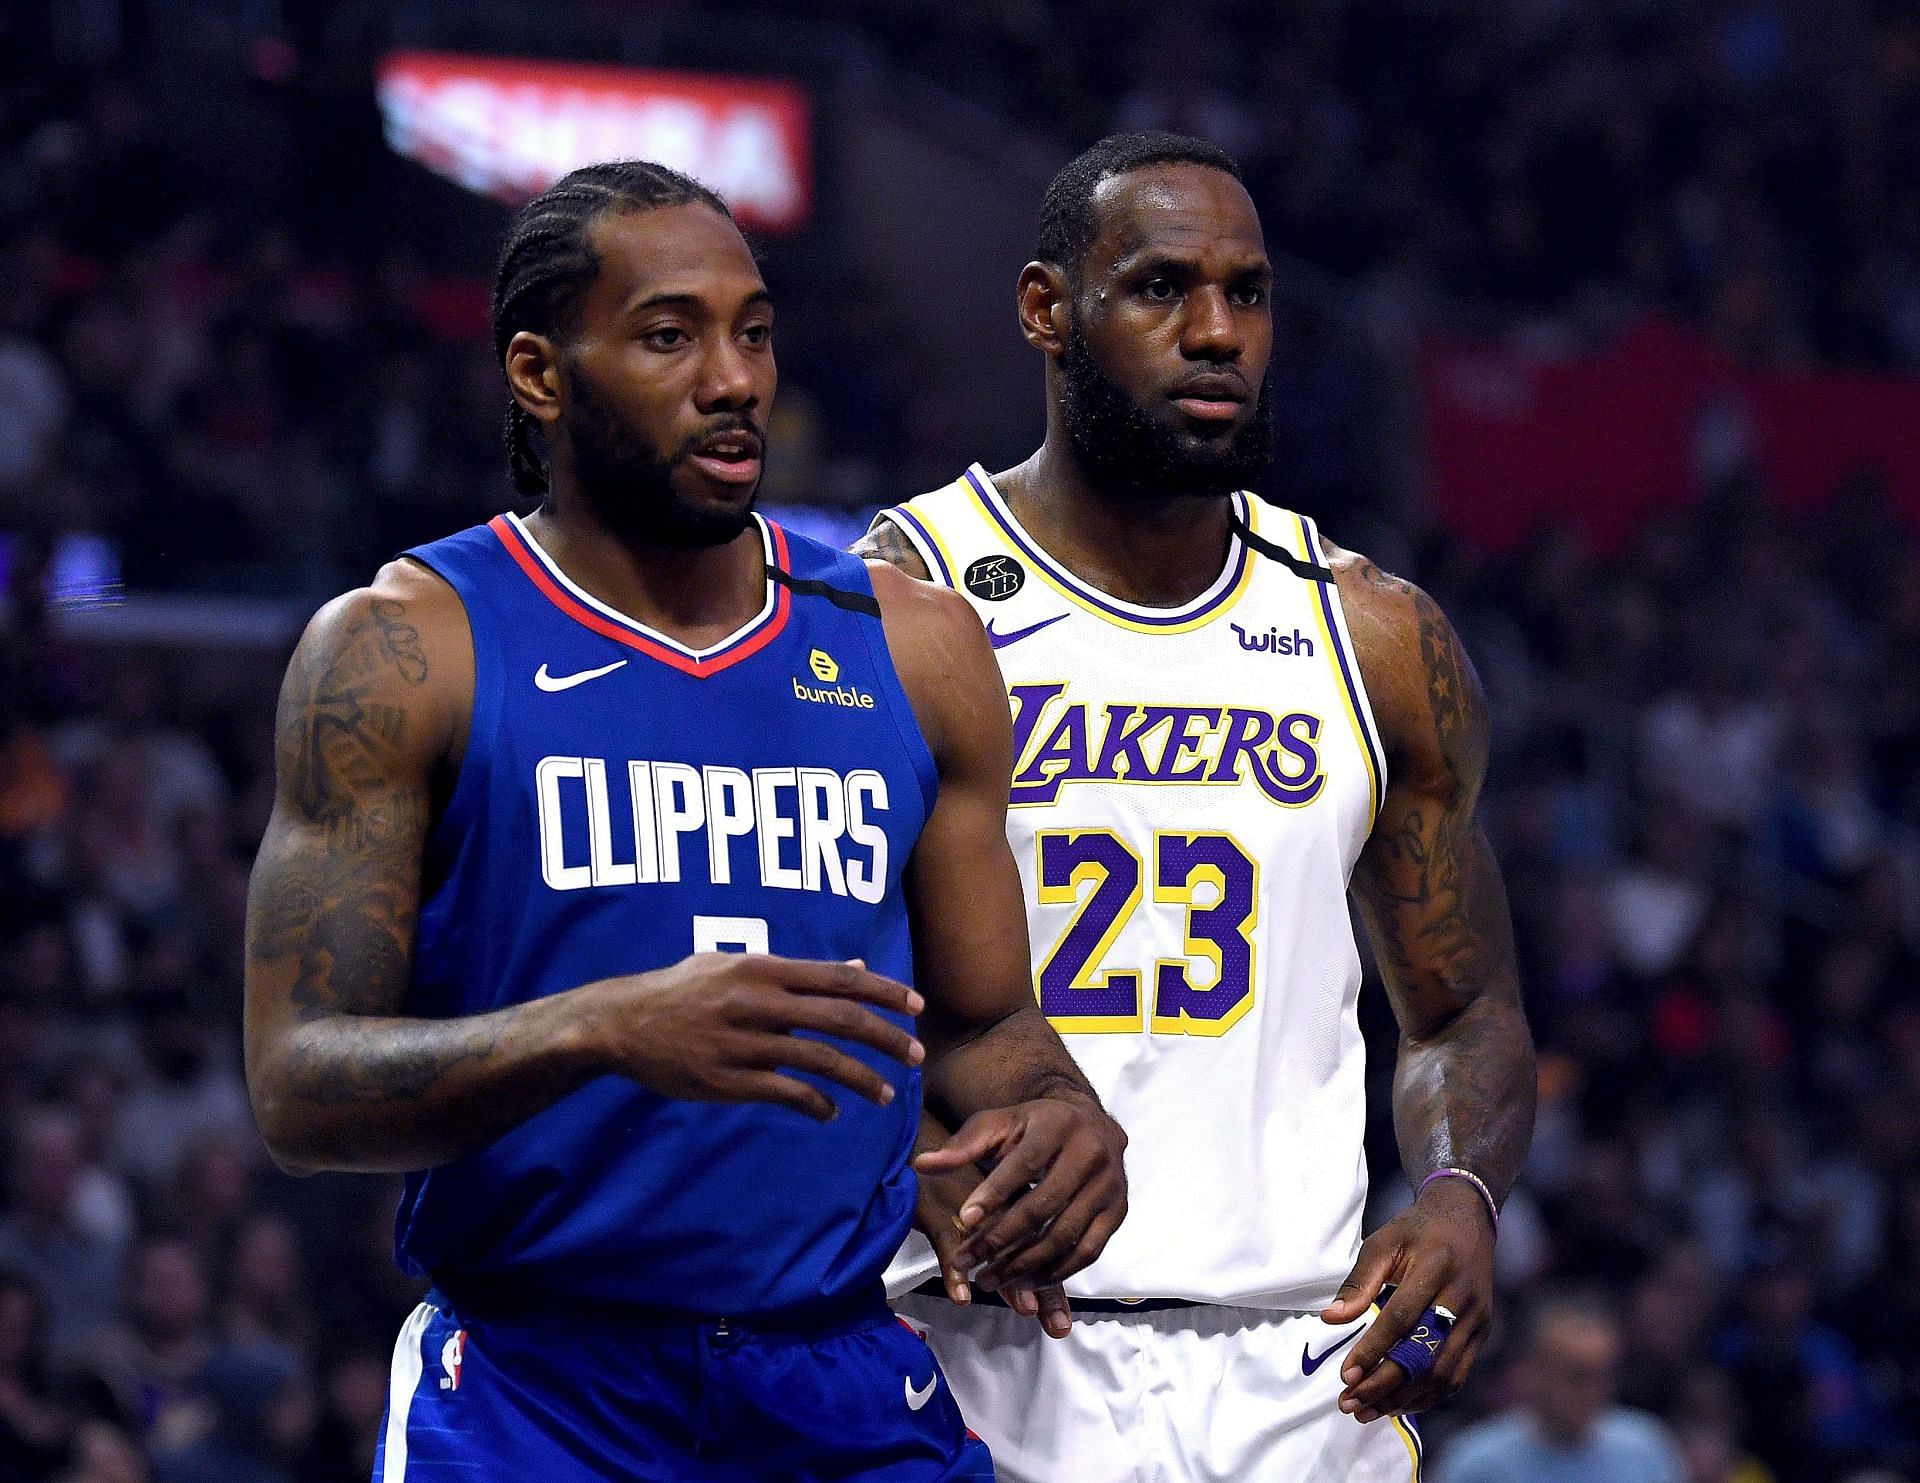 Clippers duo outshines Lakers pair inAll-Star Game